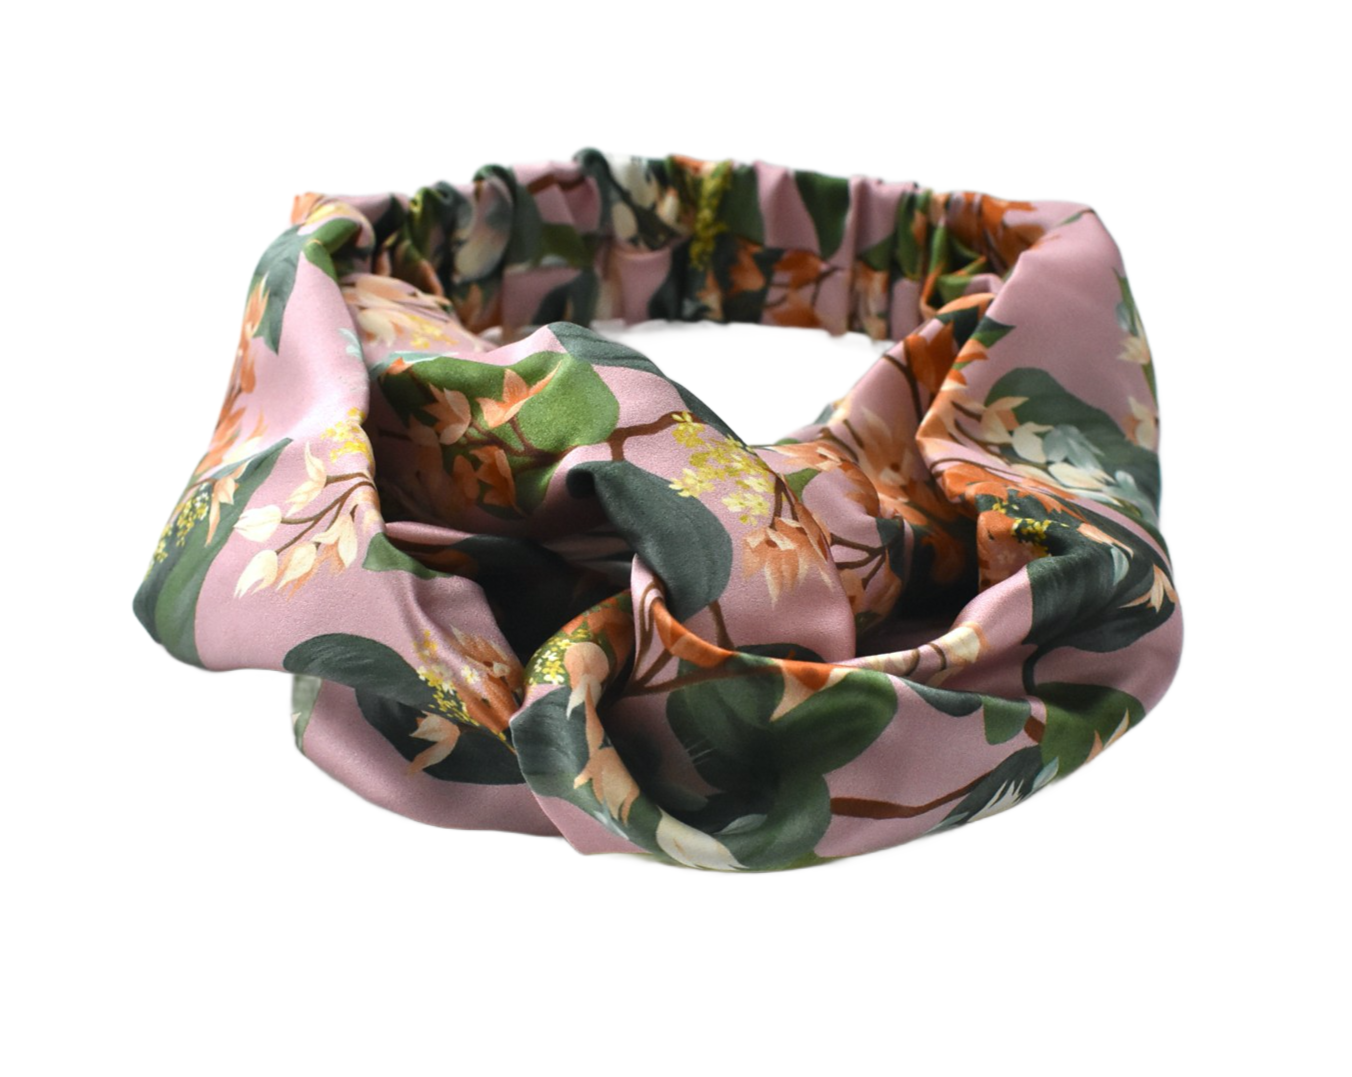 Silk Twisted Turban hairband and neck scarf in Liberty London Osterley Pink Floral - 100% Silk-Satin